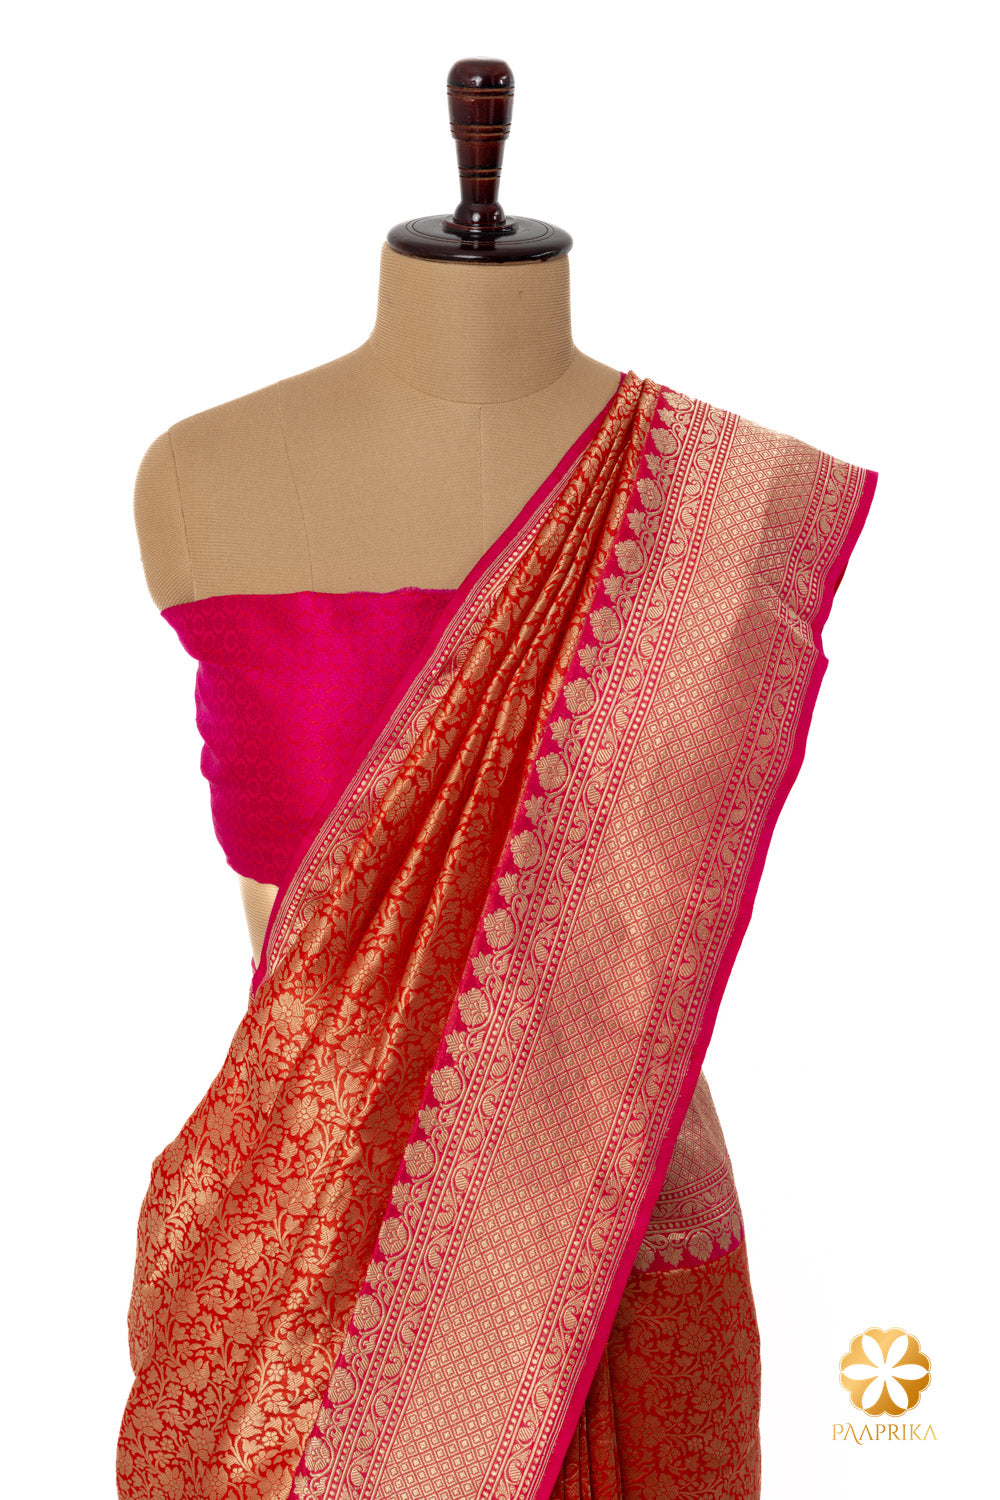 The saree draped gracefully on a mannequin.